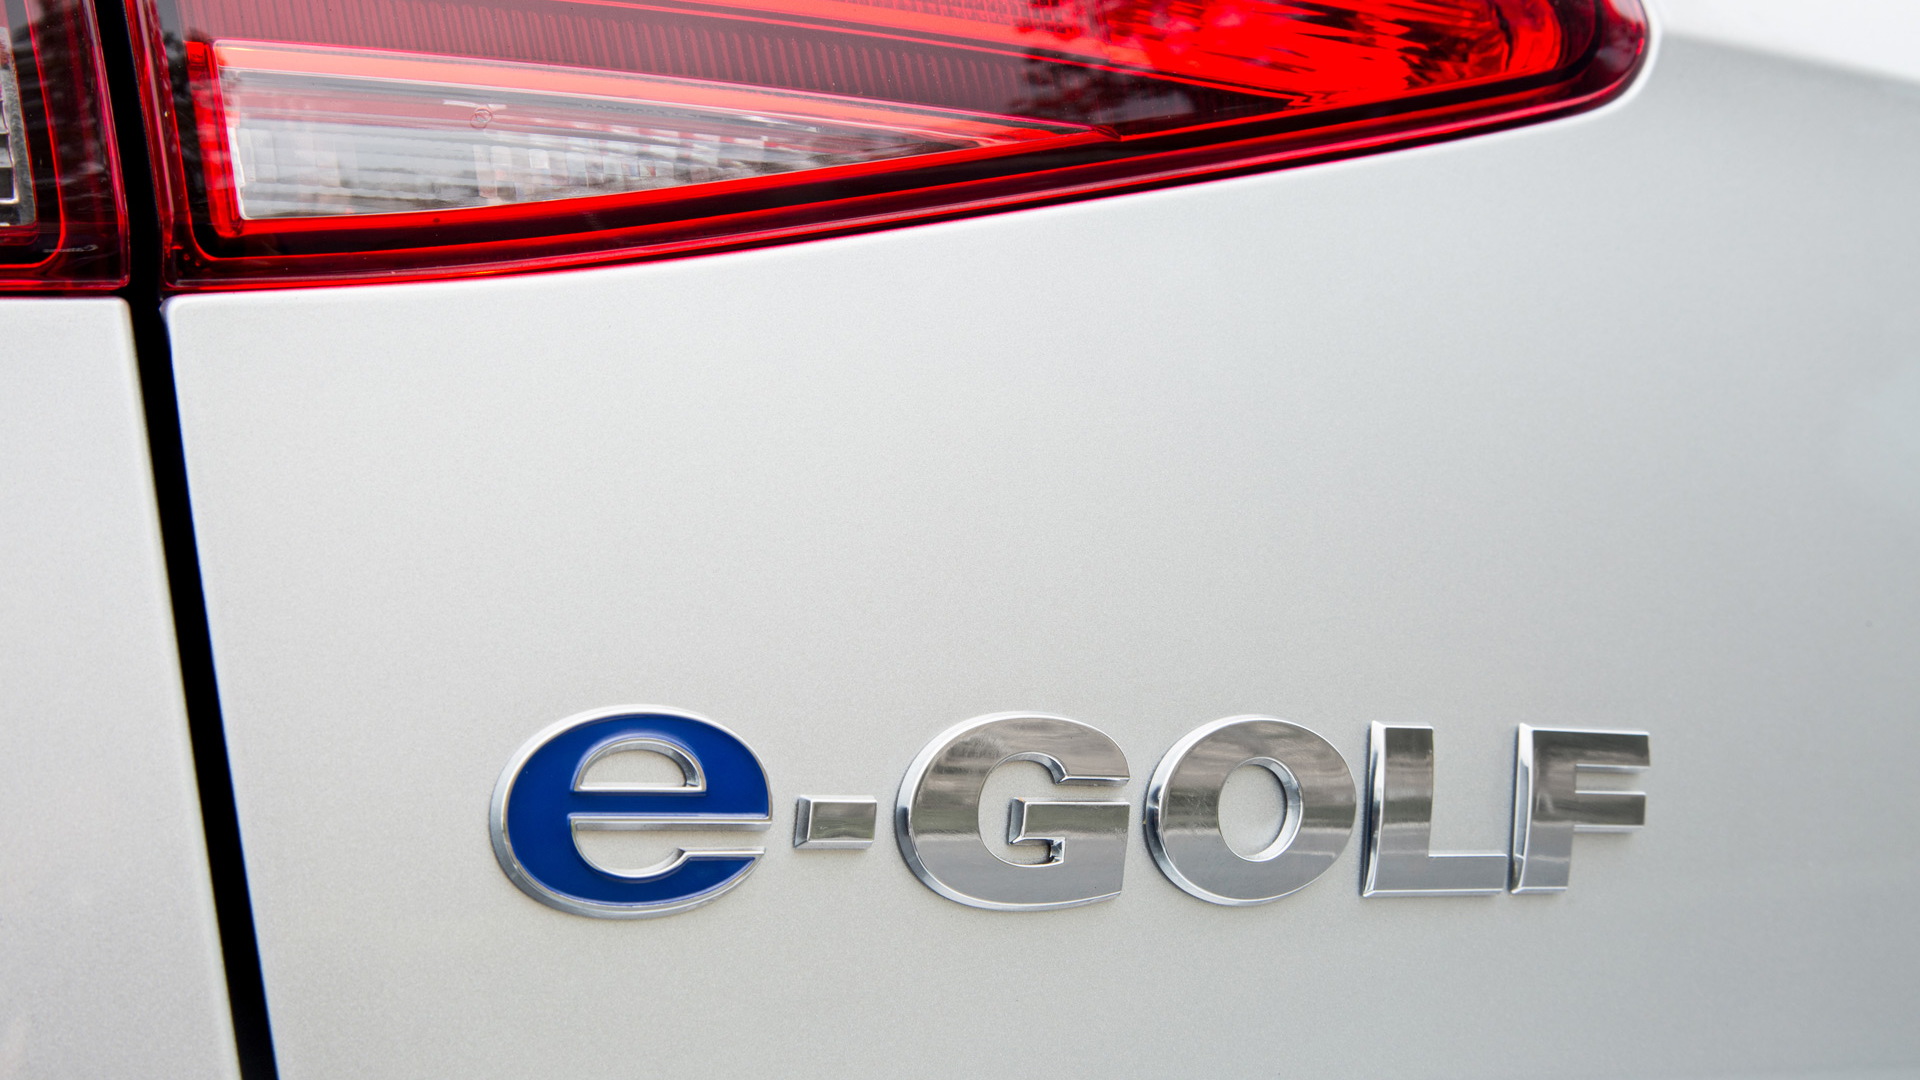 Volkswagen e-Golf Touch - 2016 Consumer Electronics Show